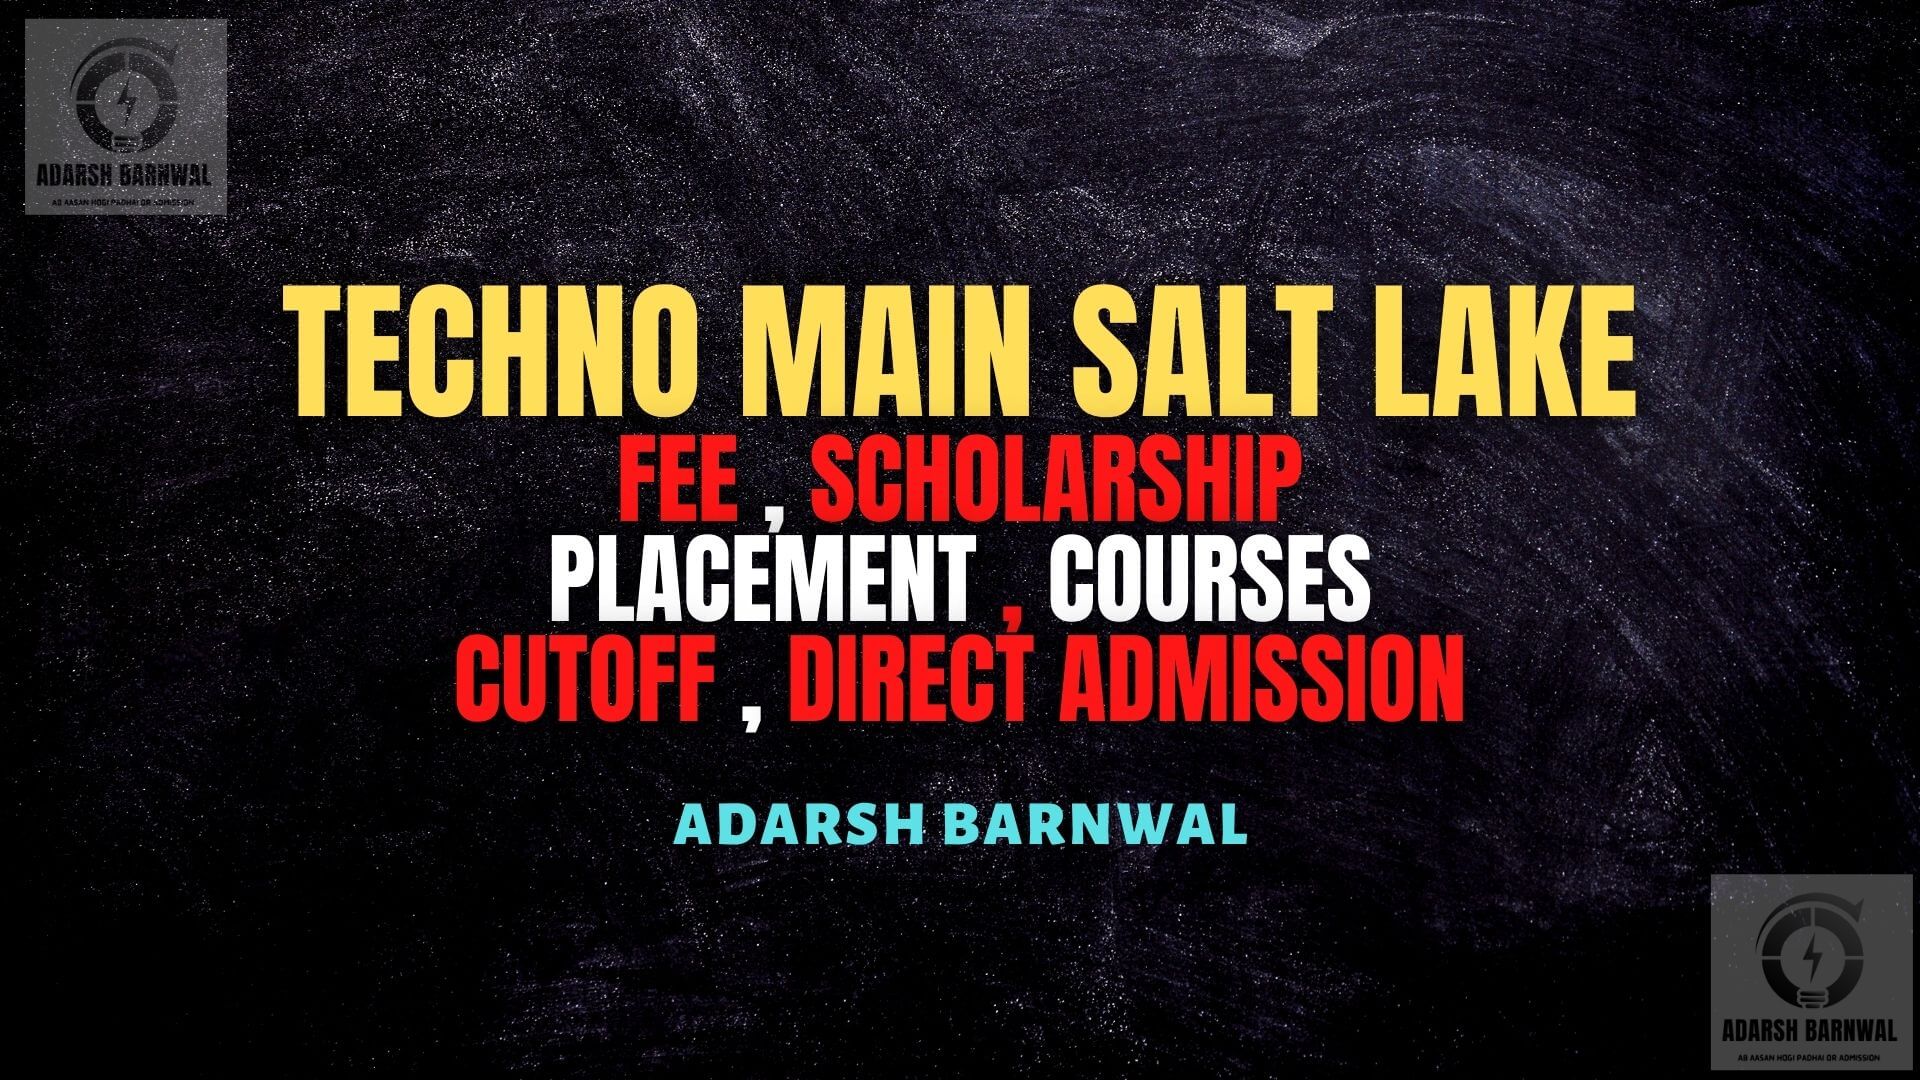 Techno Main Salt lake : Cutoff , Ranking , Placement , Courses , Admission , Fees 2023-2024